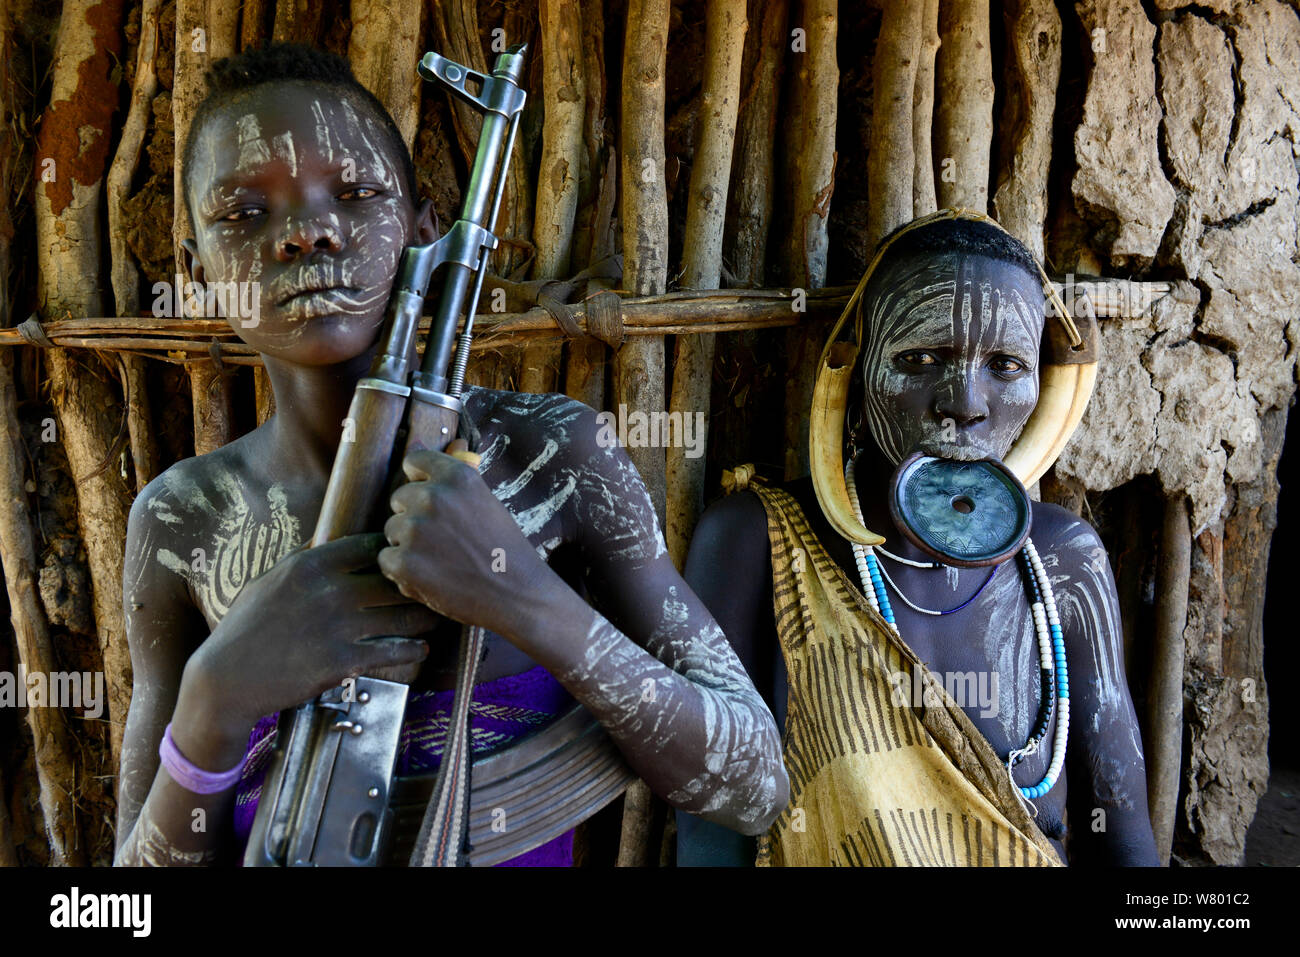 Mursi boy with gun, with mother who has a lip plate, Mursi tribe. Mago National Park. Ethiopia, November 2014 Stock Photo